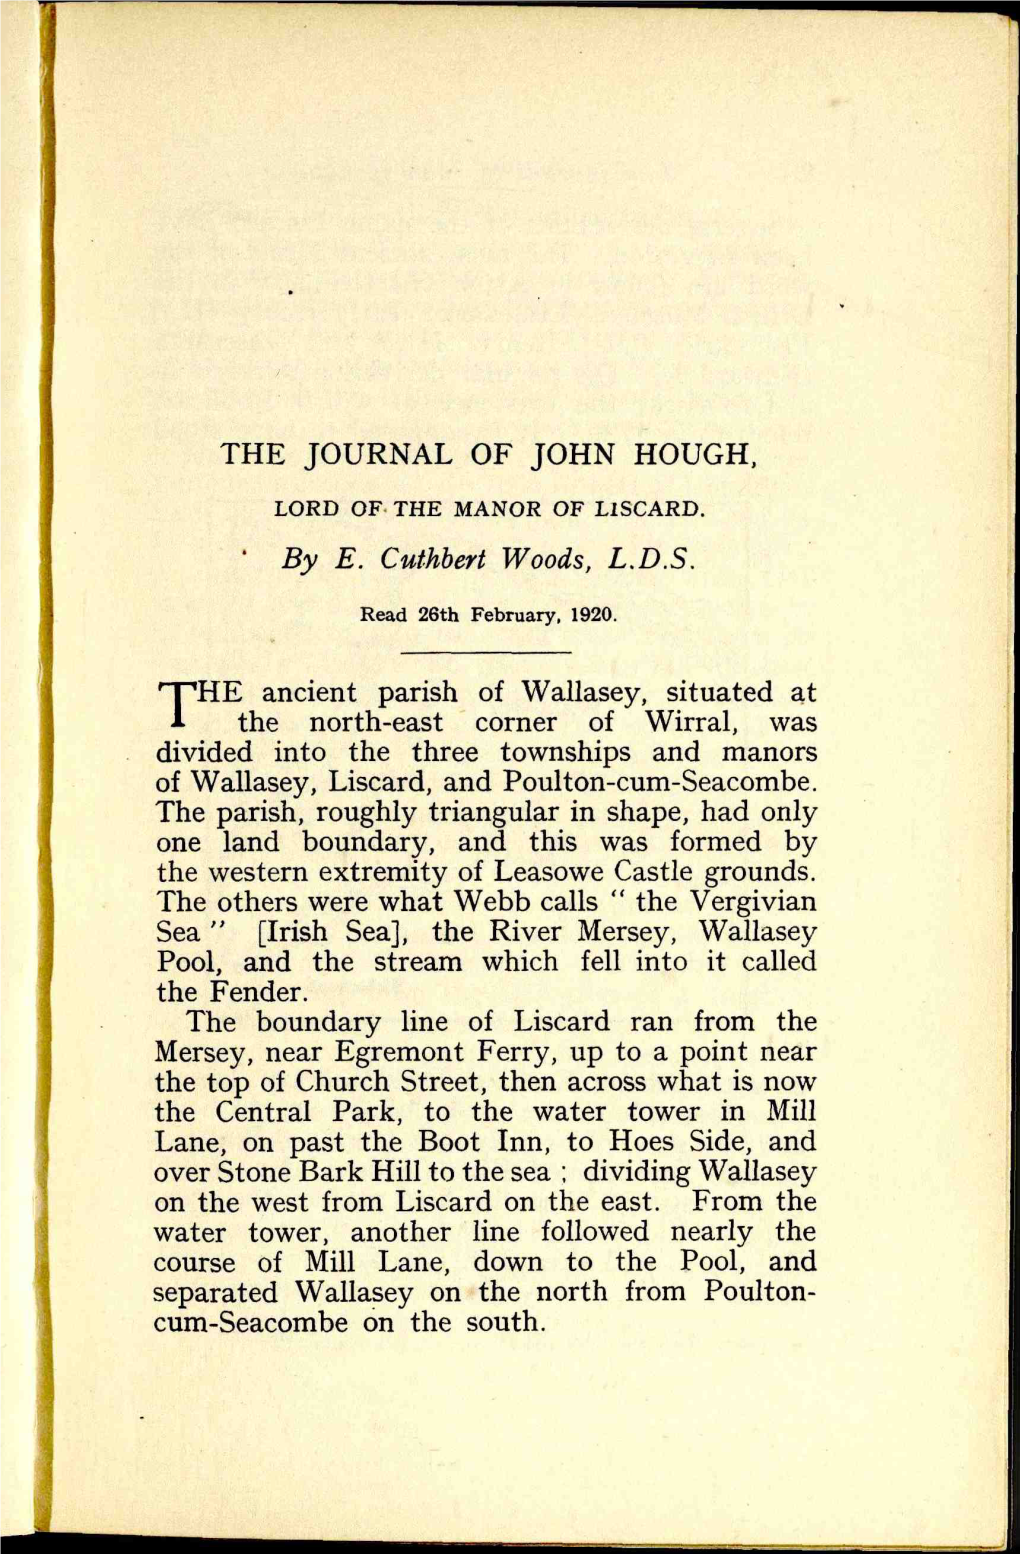 THE JOURNAL of JOHN HOUGH, the Ancient Parish of Wallasey